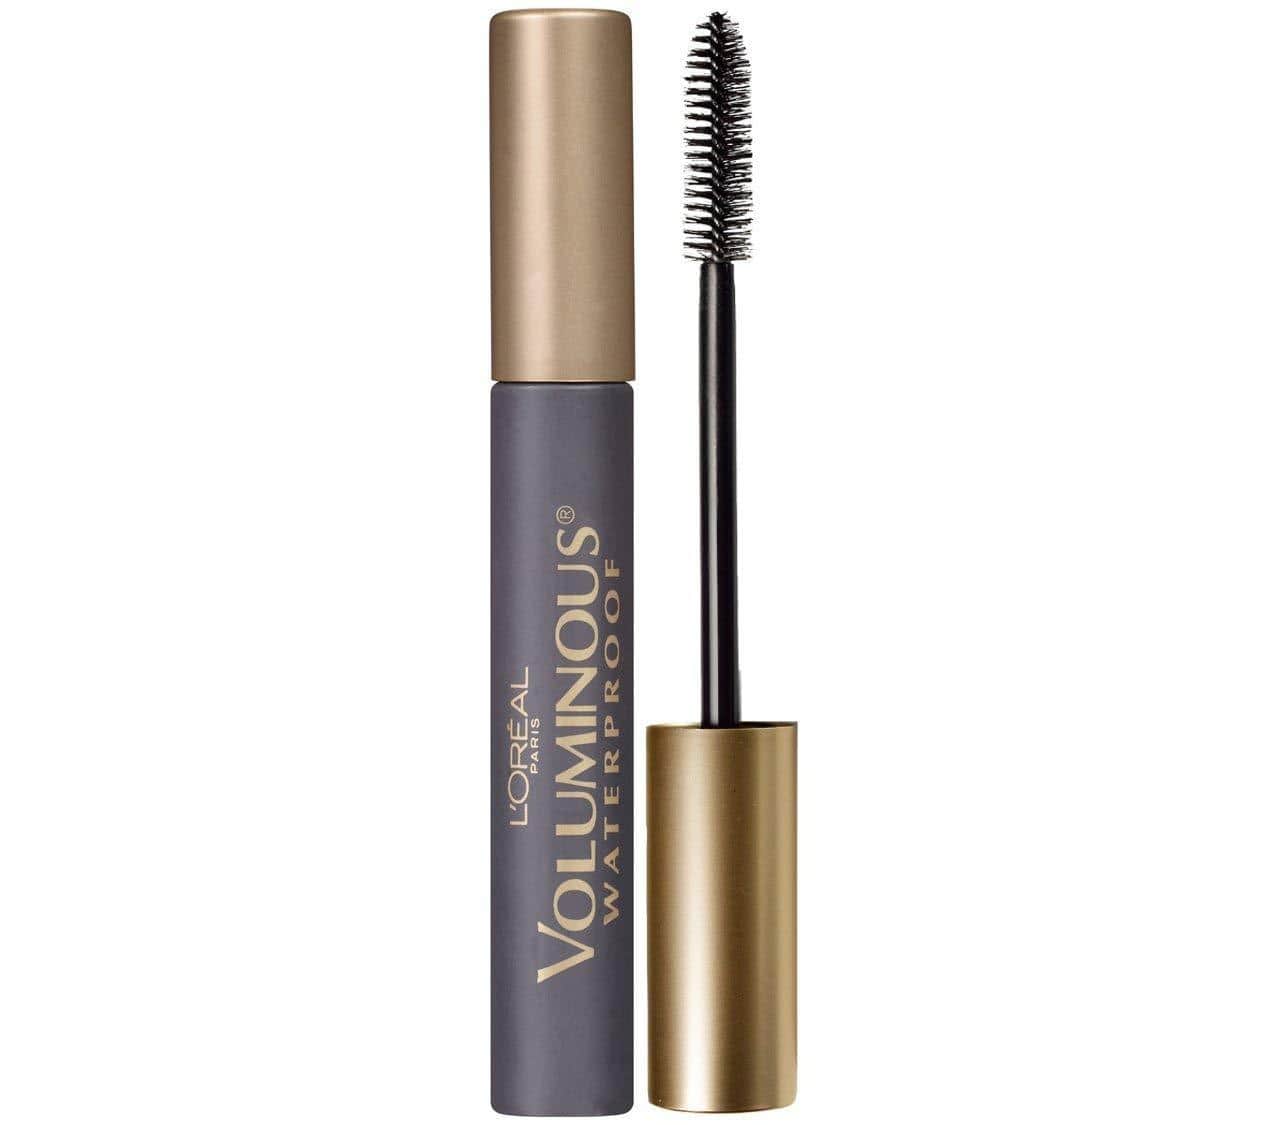 This iconic waterproof mascara consistently delivers thick, fluttery, and bold lashes, offering a broad selection of colors and reliable performance at an affordable price, standing the test of time.